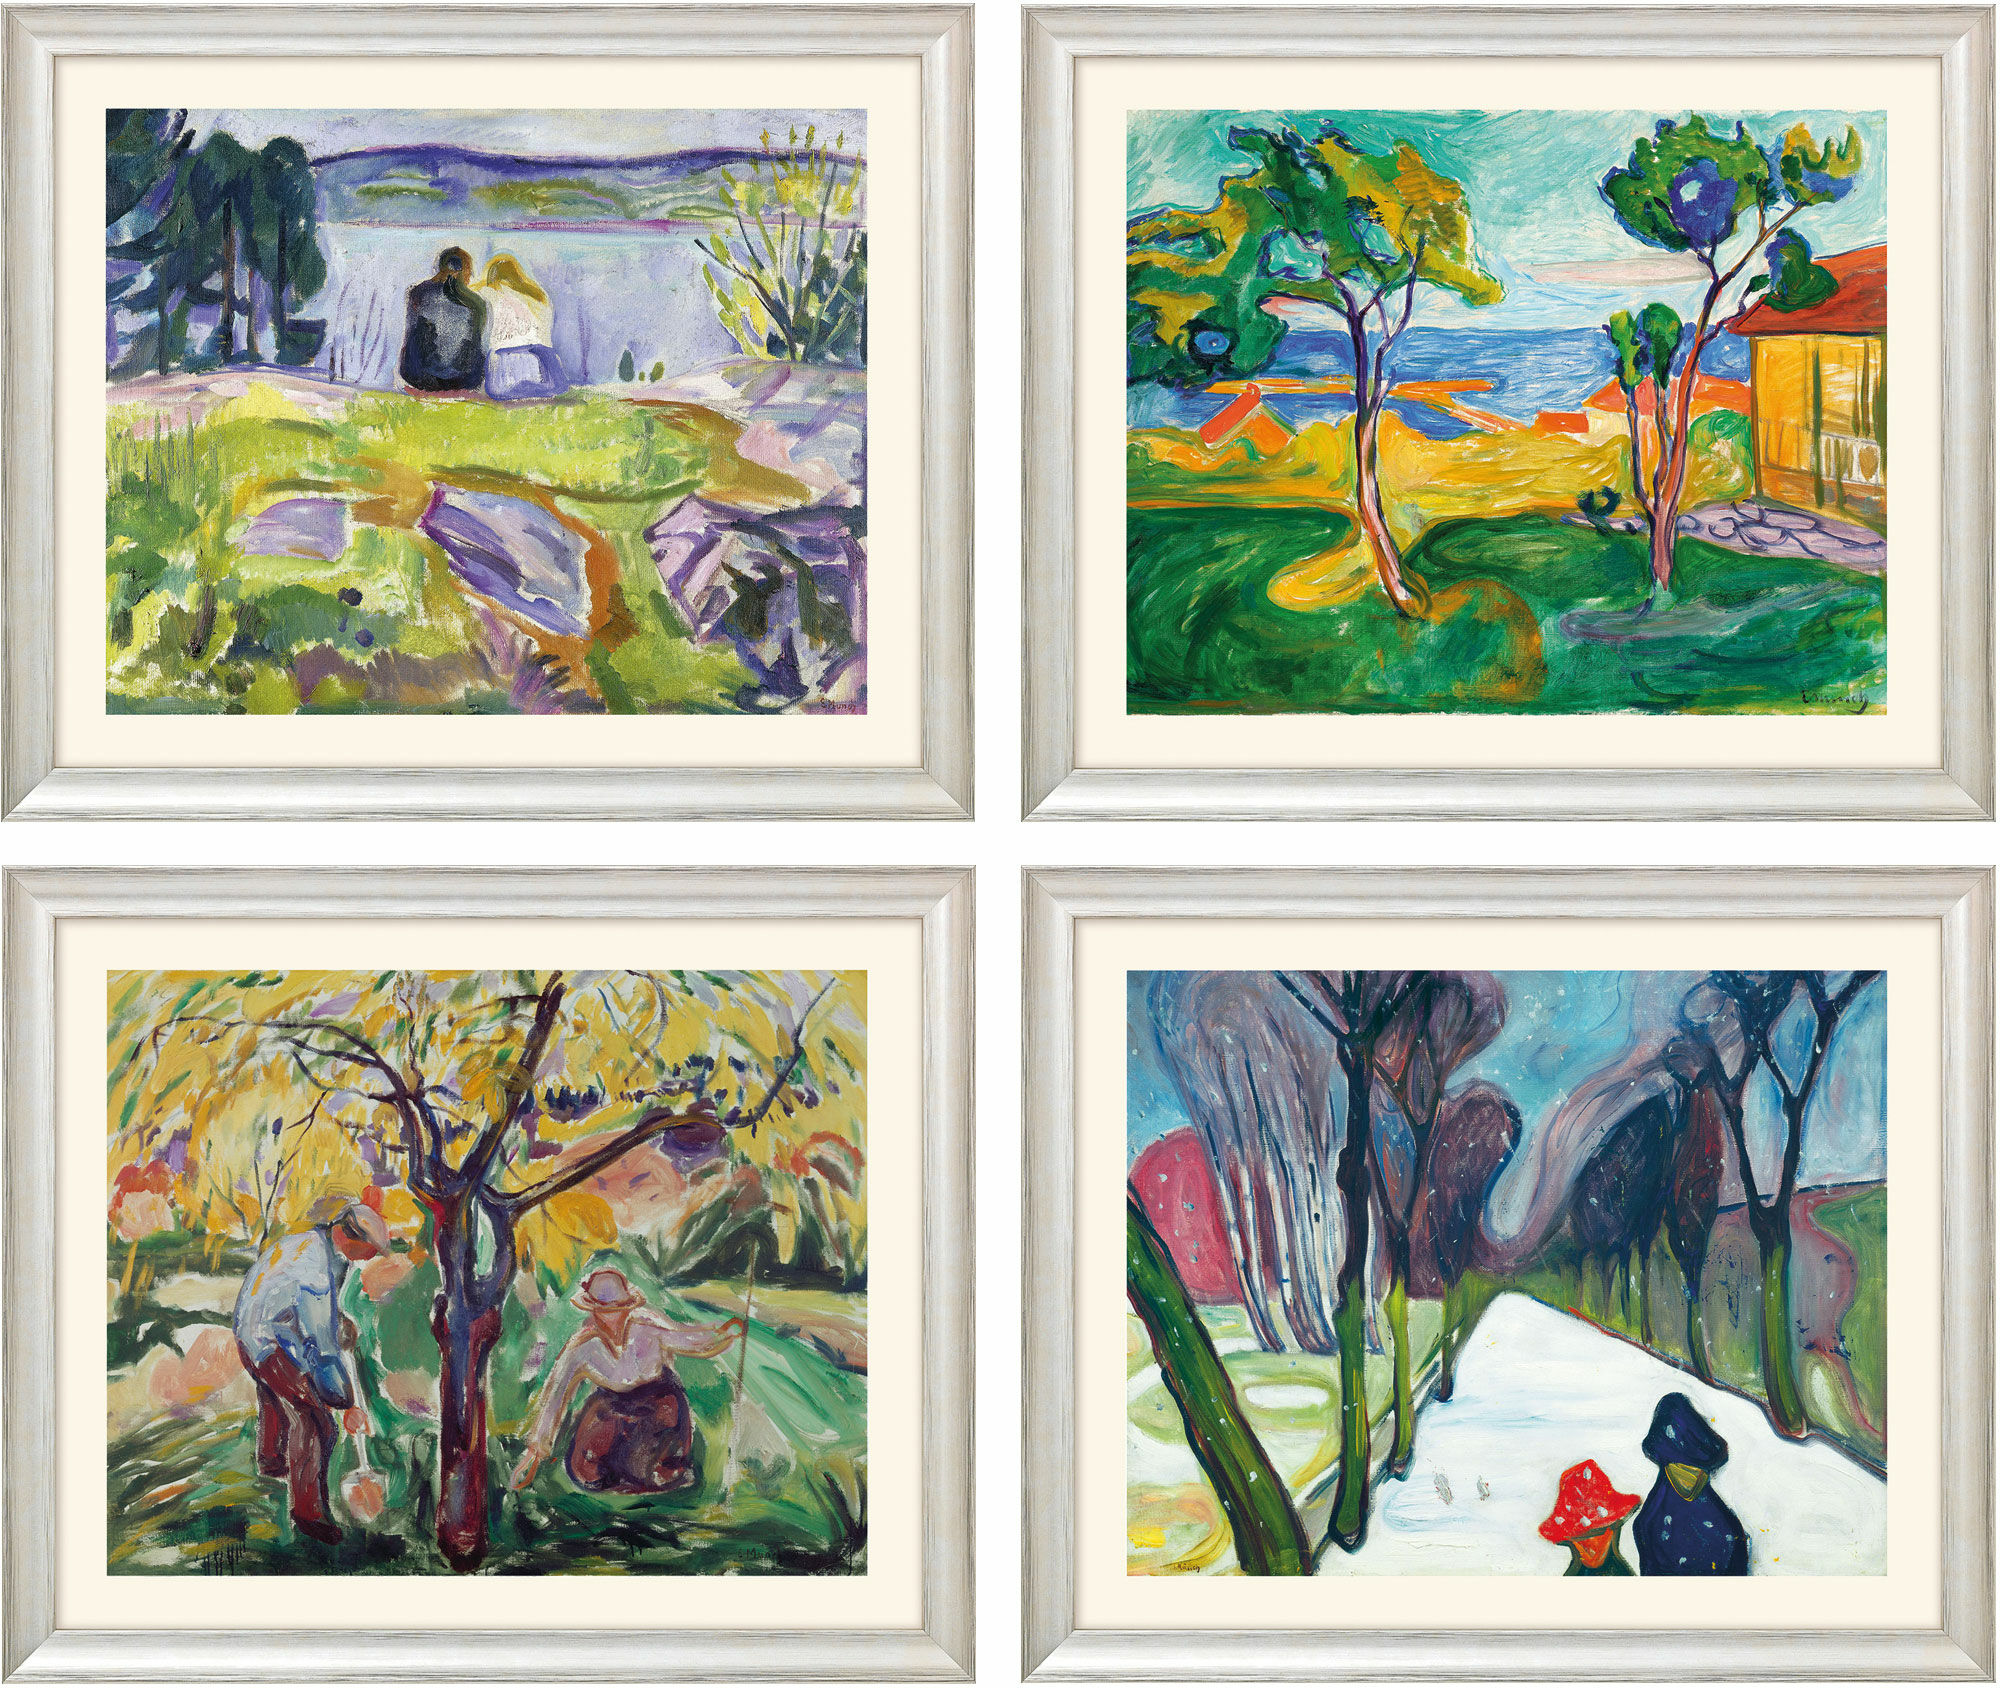 Set of 4 pictures "Seasons Cycle", silver-coloured framed version by Edvard Munch